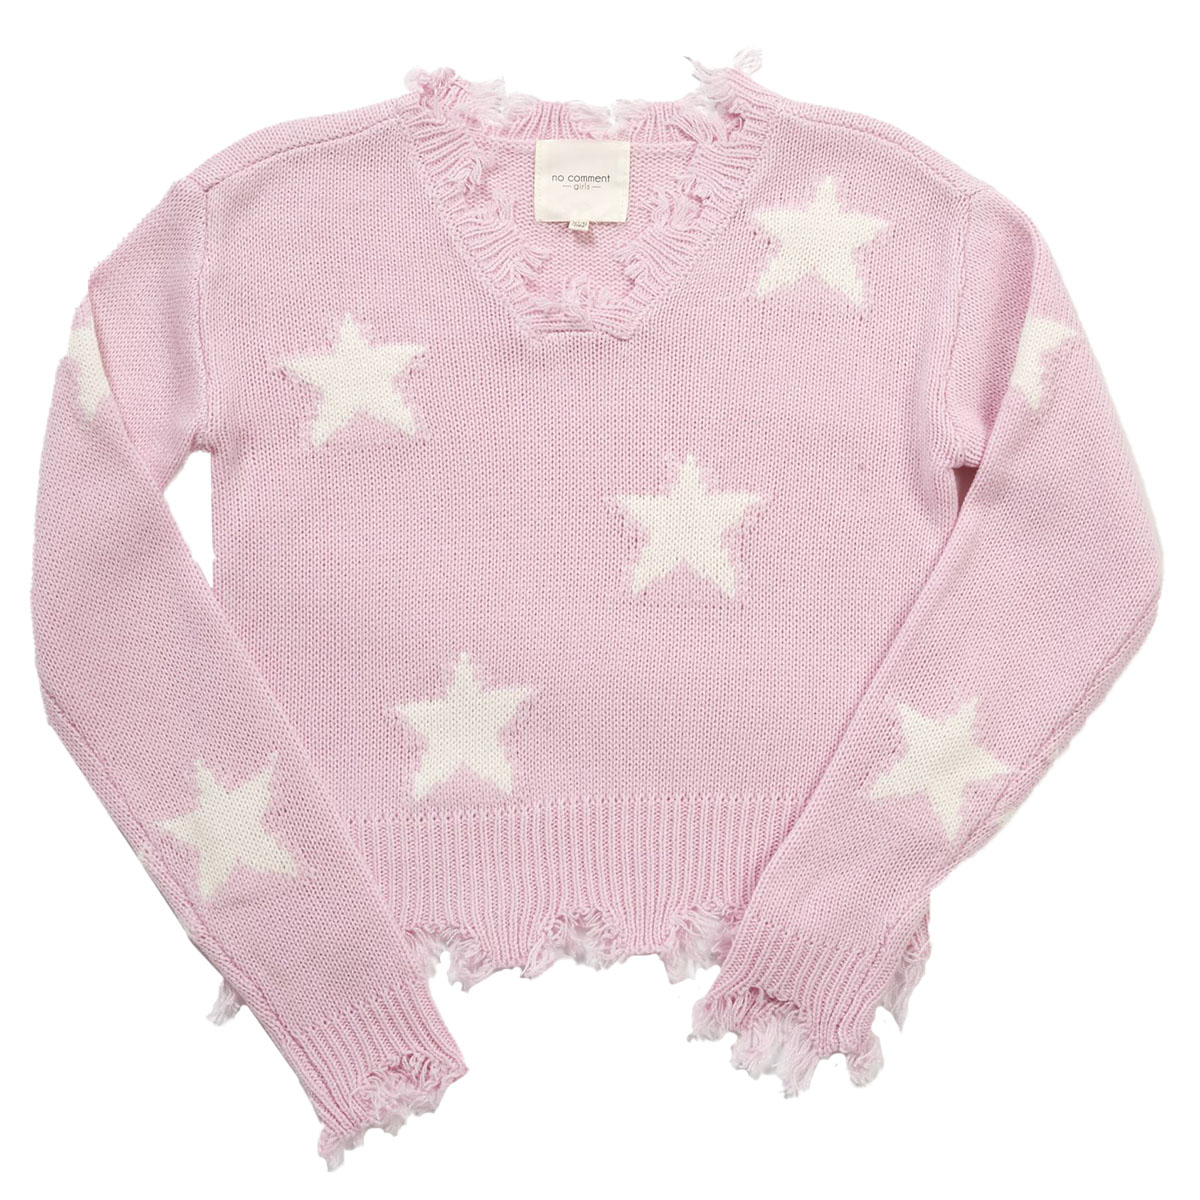 Girls (7-16) No Comment Distress Star Jacquard Sweater